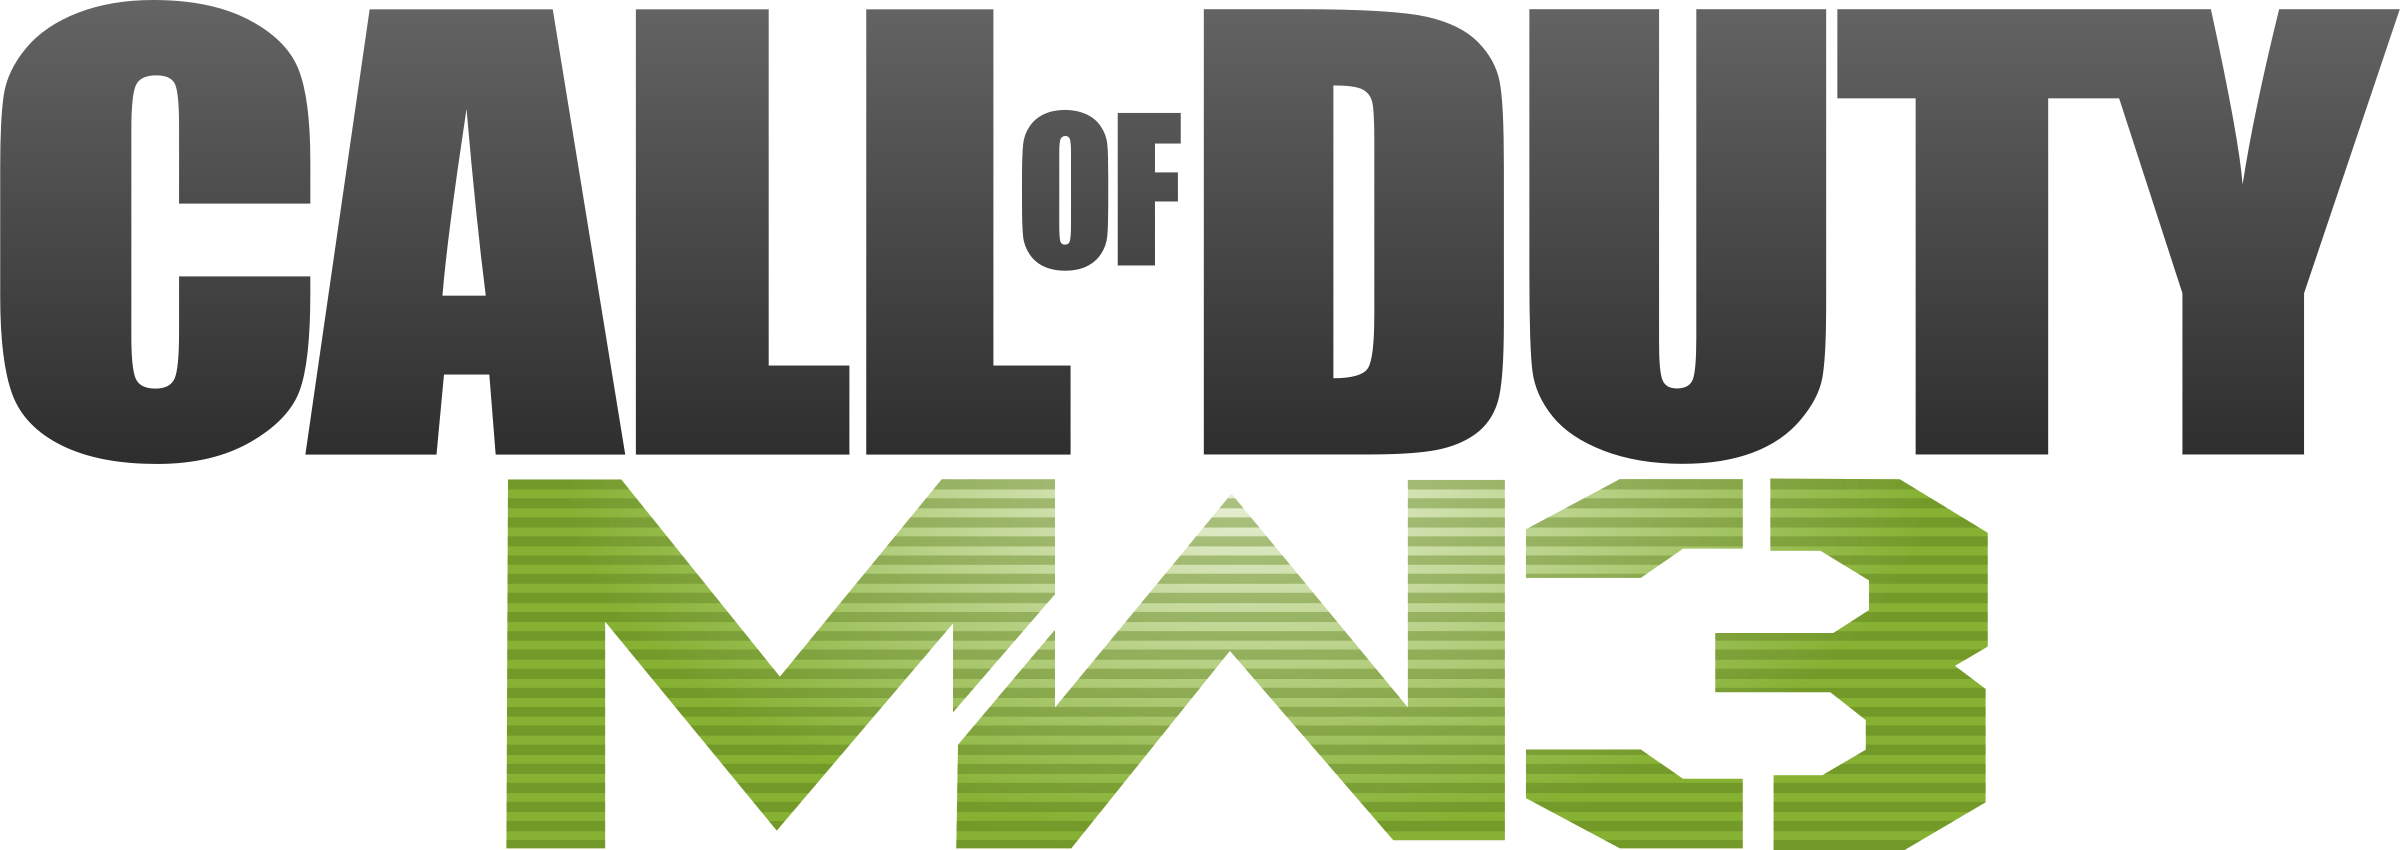 Call Of Duty Logo Png 2400 X 850